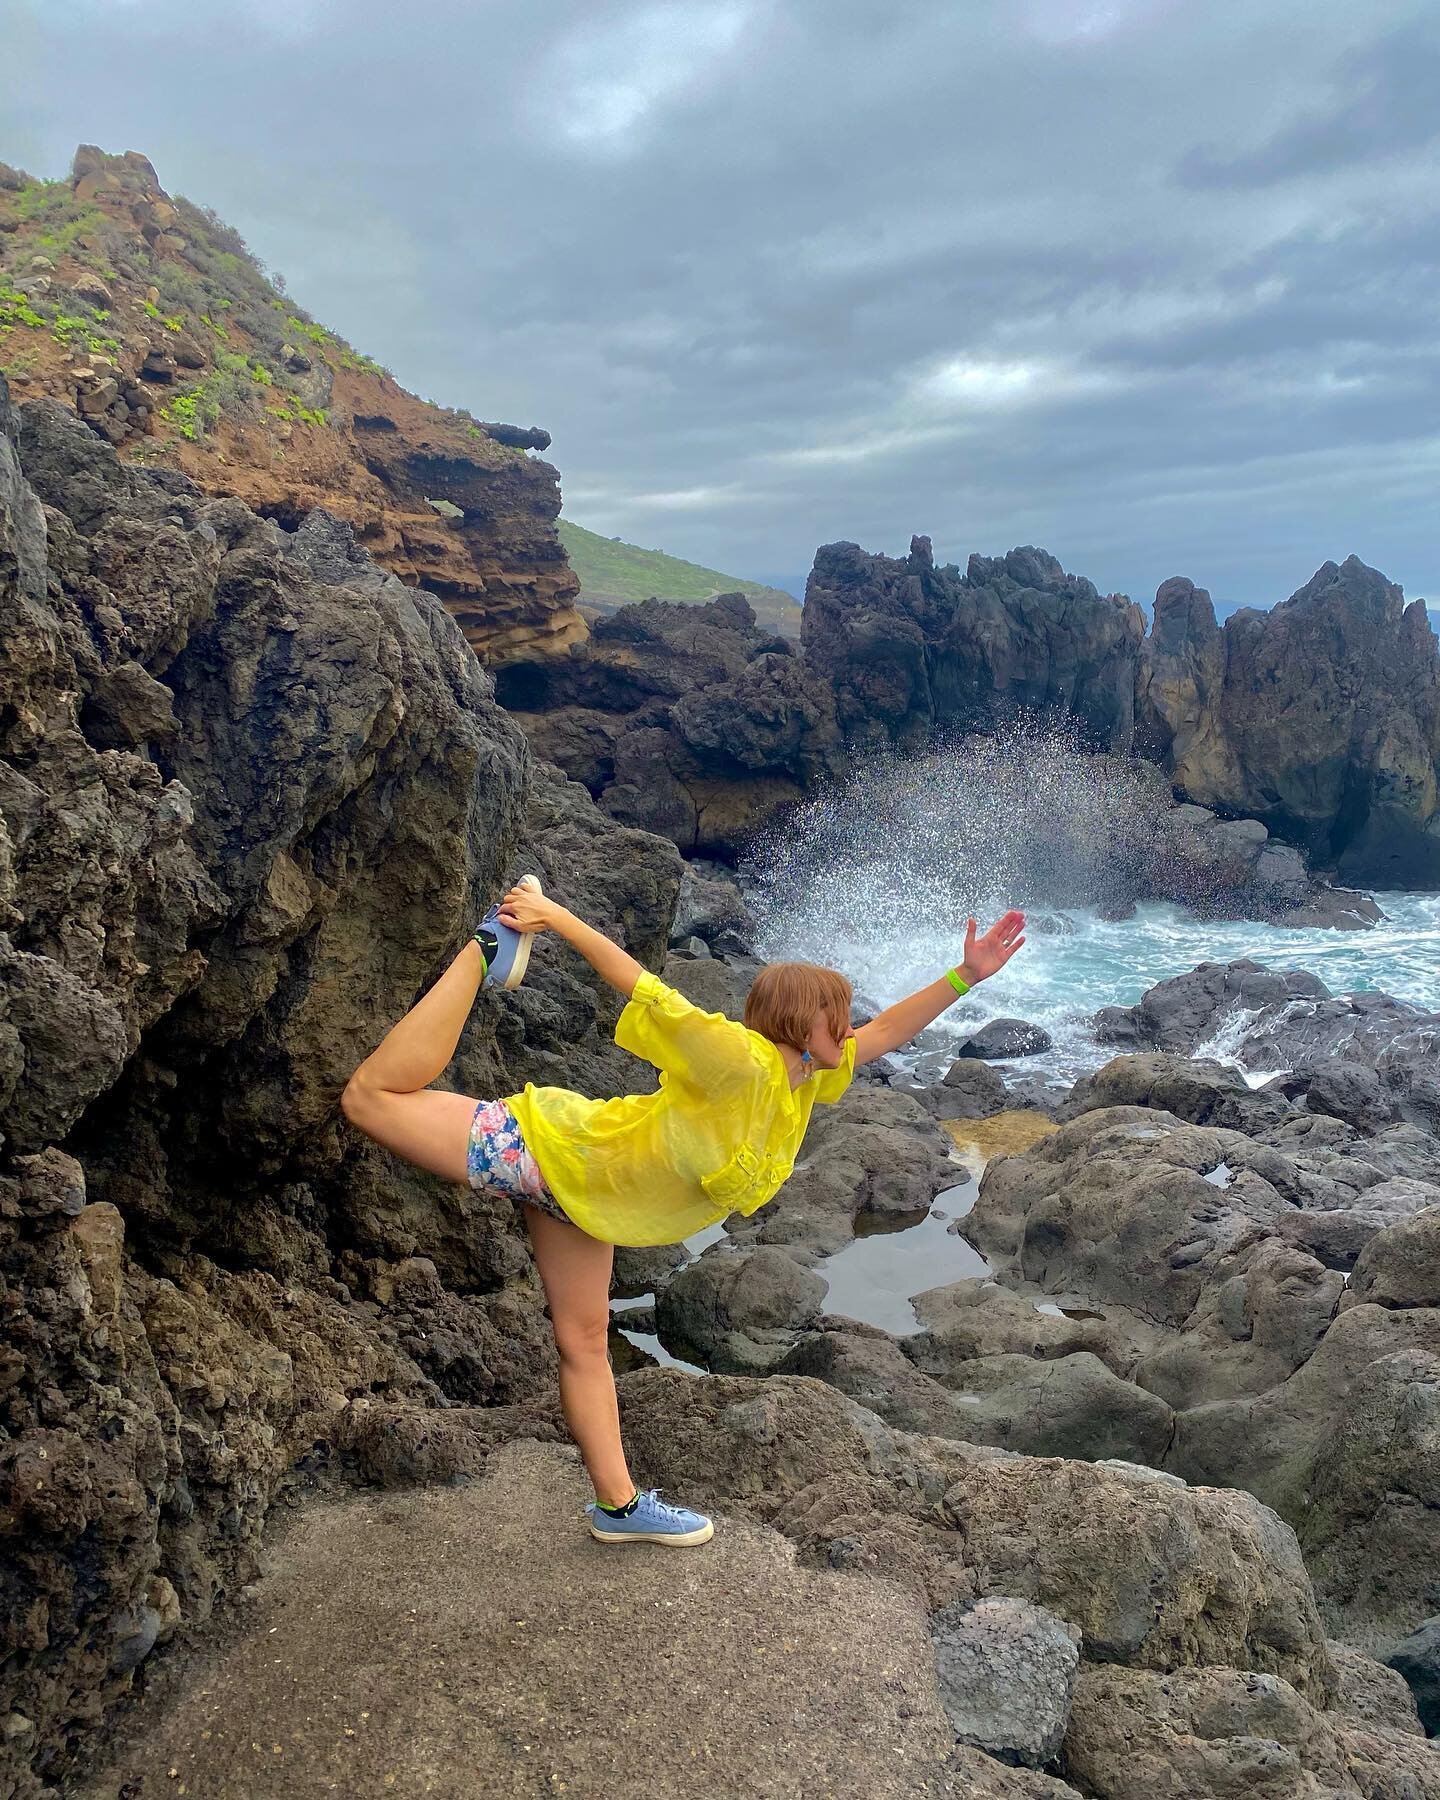 I always make sure I keep stretched out on holiday to keep mobile by doing a bit of yoga each day.
.
You often find don&rsquo;t you that when you take a break you start feeling stiffer than usual.
.
Because your body is like a very complex machine th